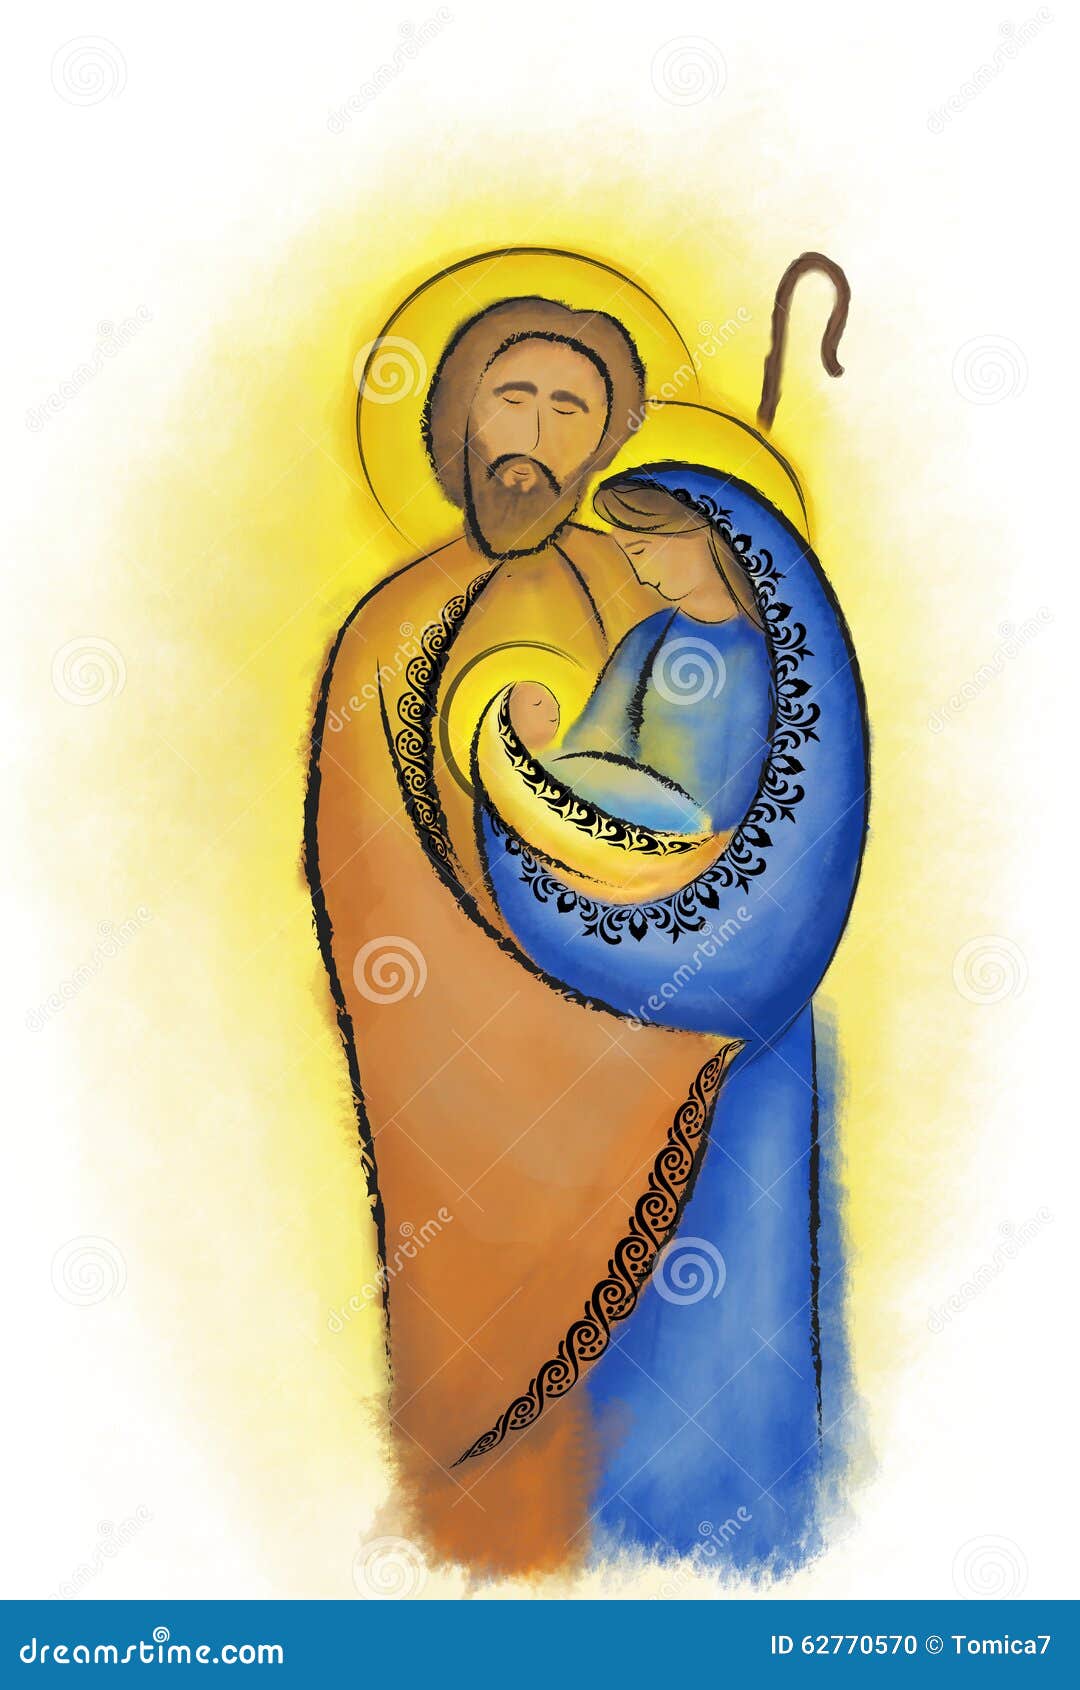 holy family clipart images - photo #38